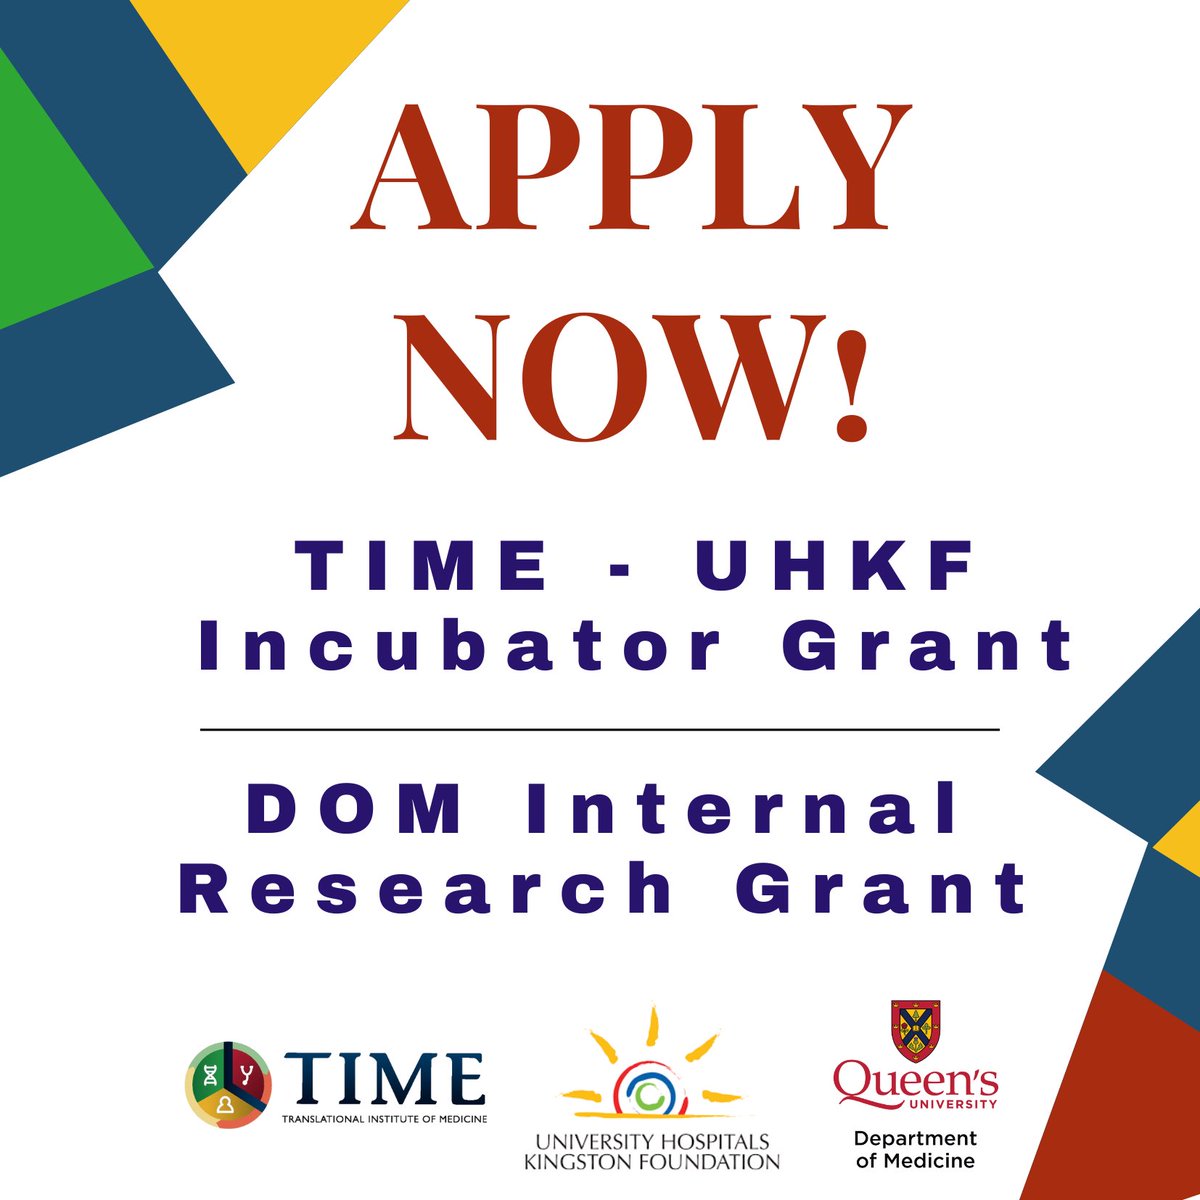 The TIME-UHKF Incubator Grants and the @QueensuDOM Internal Research grants are now OPEN! deptmed.queensu.ca/news/timeuhkf-… Please email time@queensu.ca if you have eligibility questions!